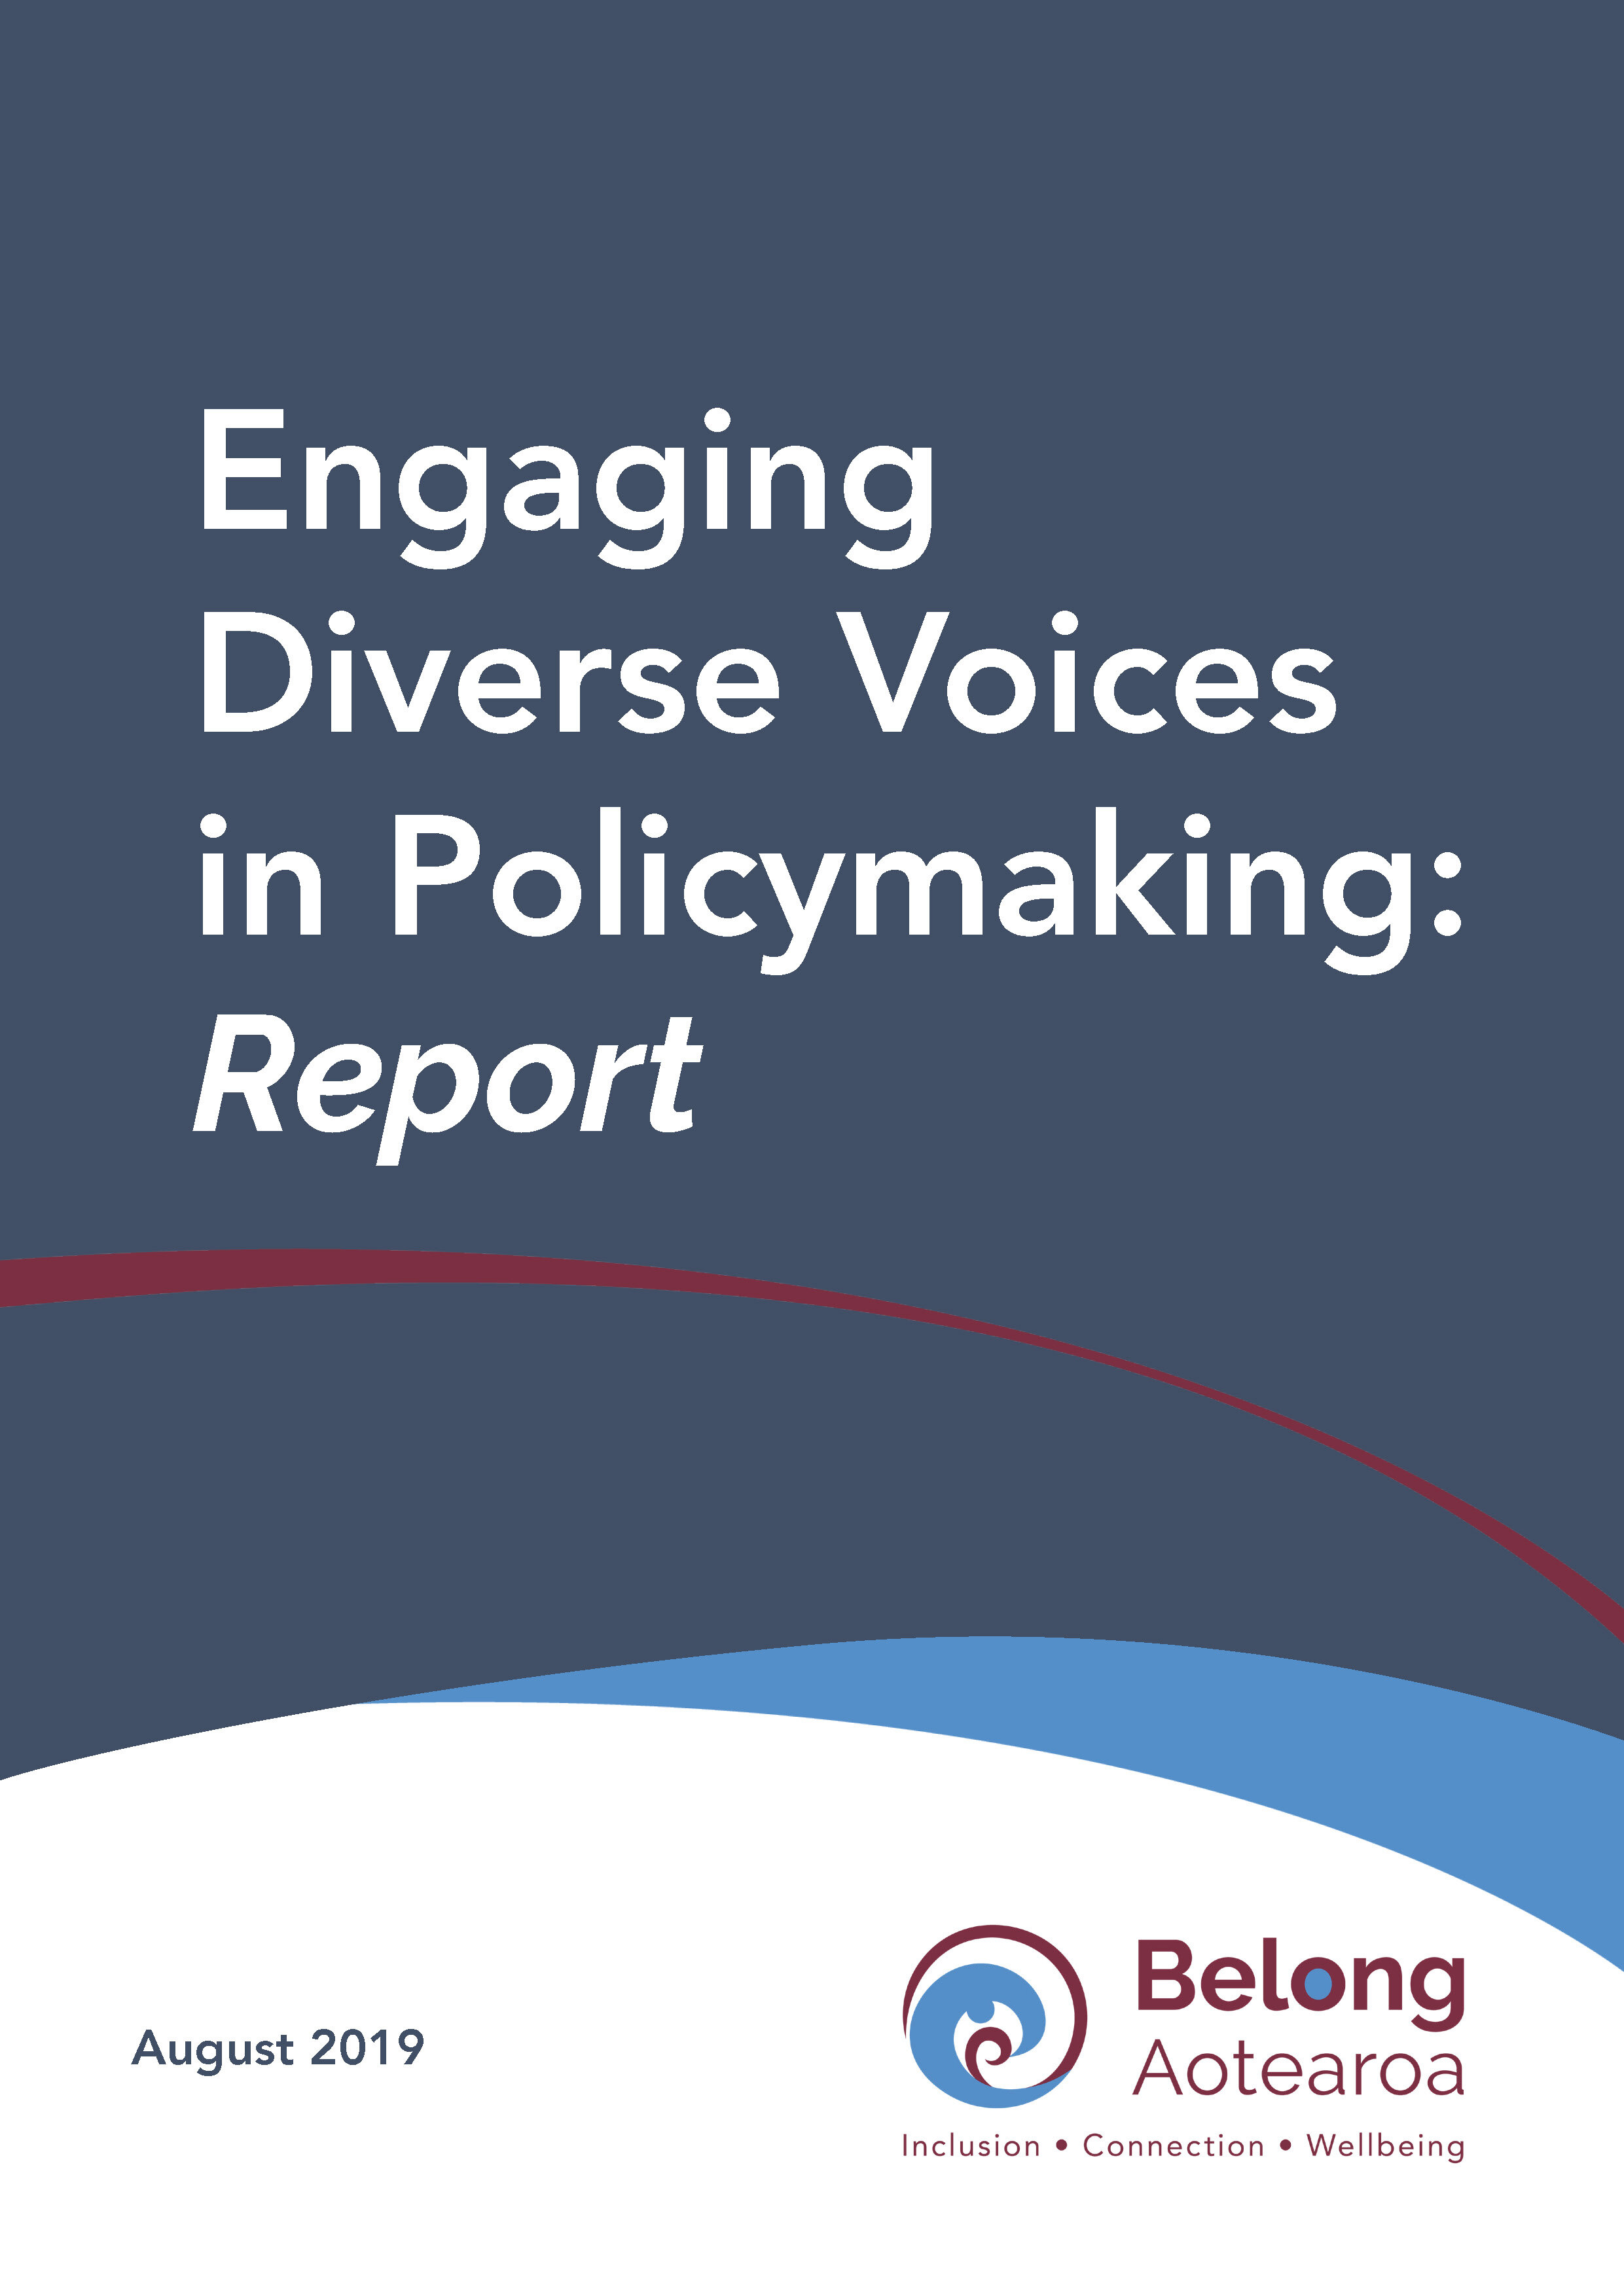 Engaging Diverse Voices in Policymaking: Report